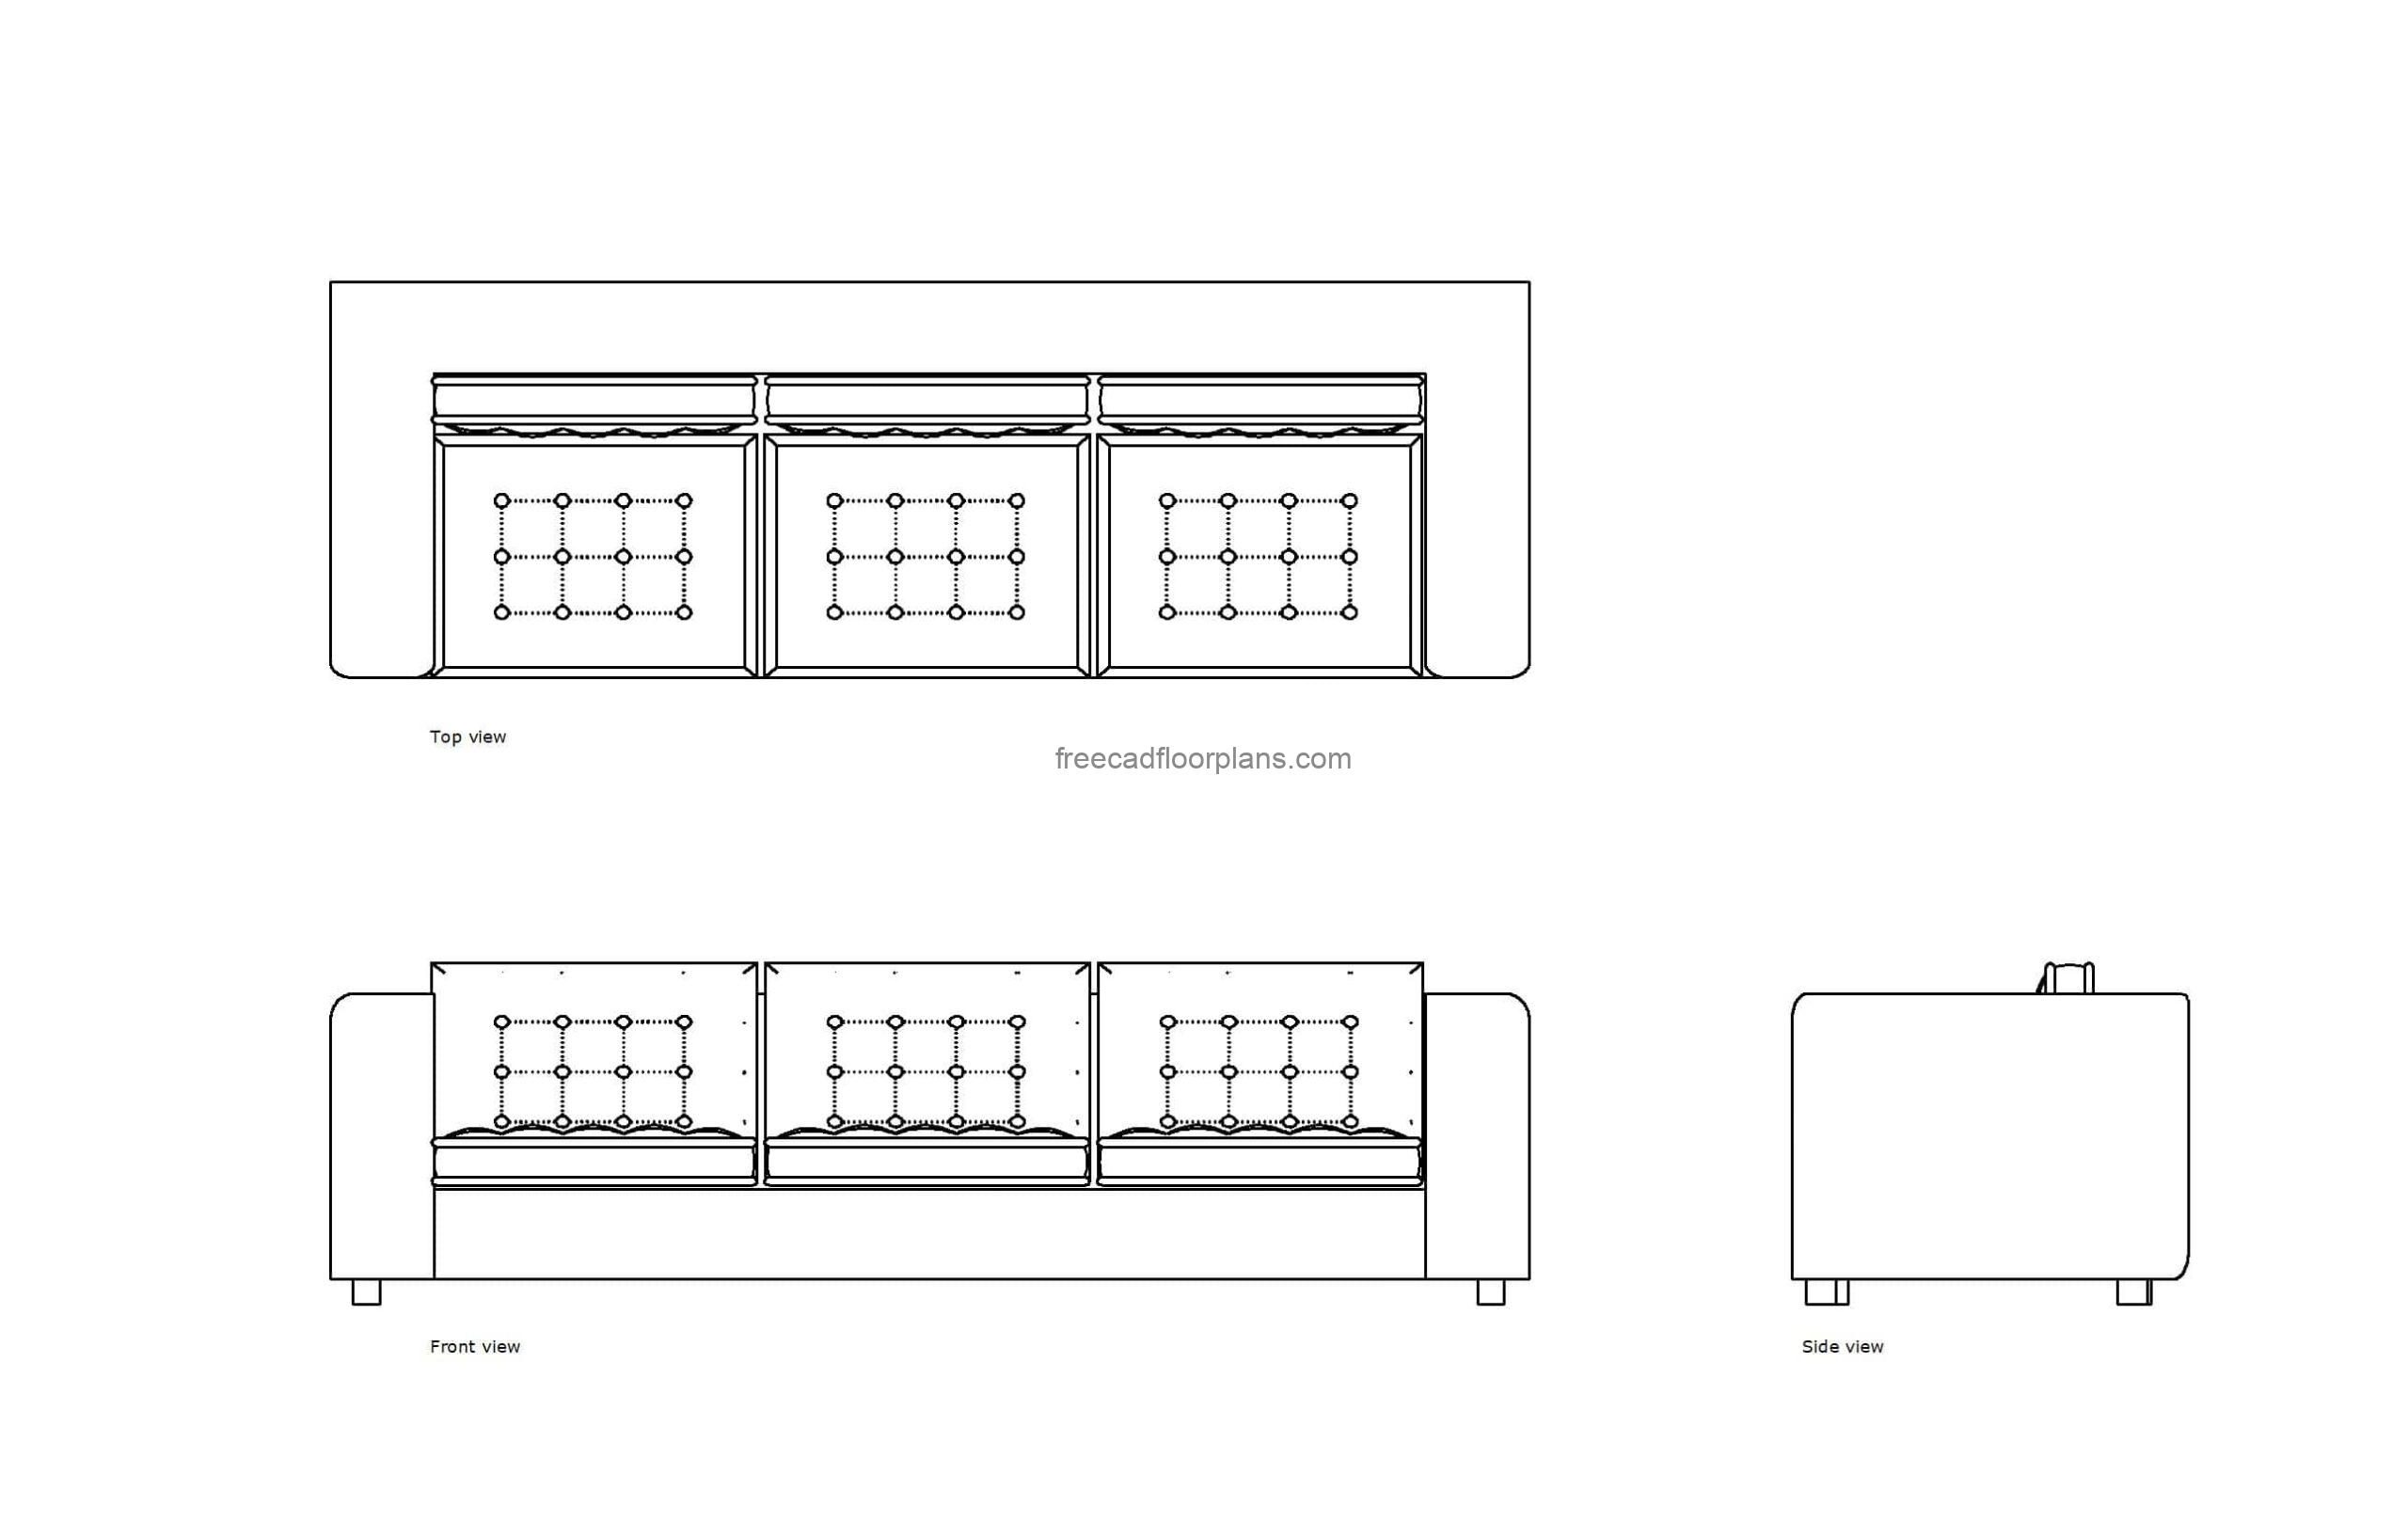 autocad drawing of a tufted sofa, plan and elevation 2d views, dwg file free for download